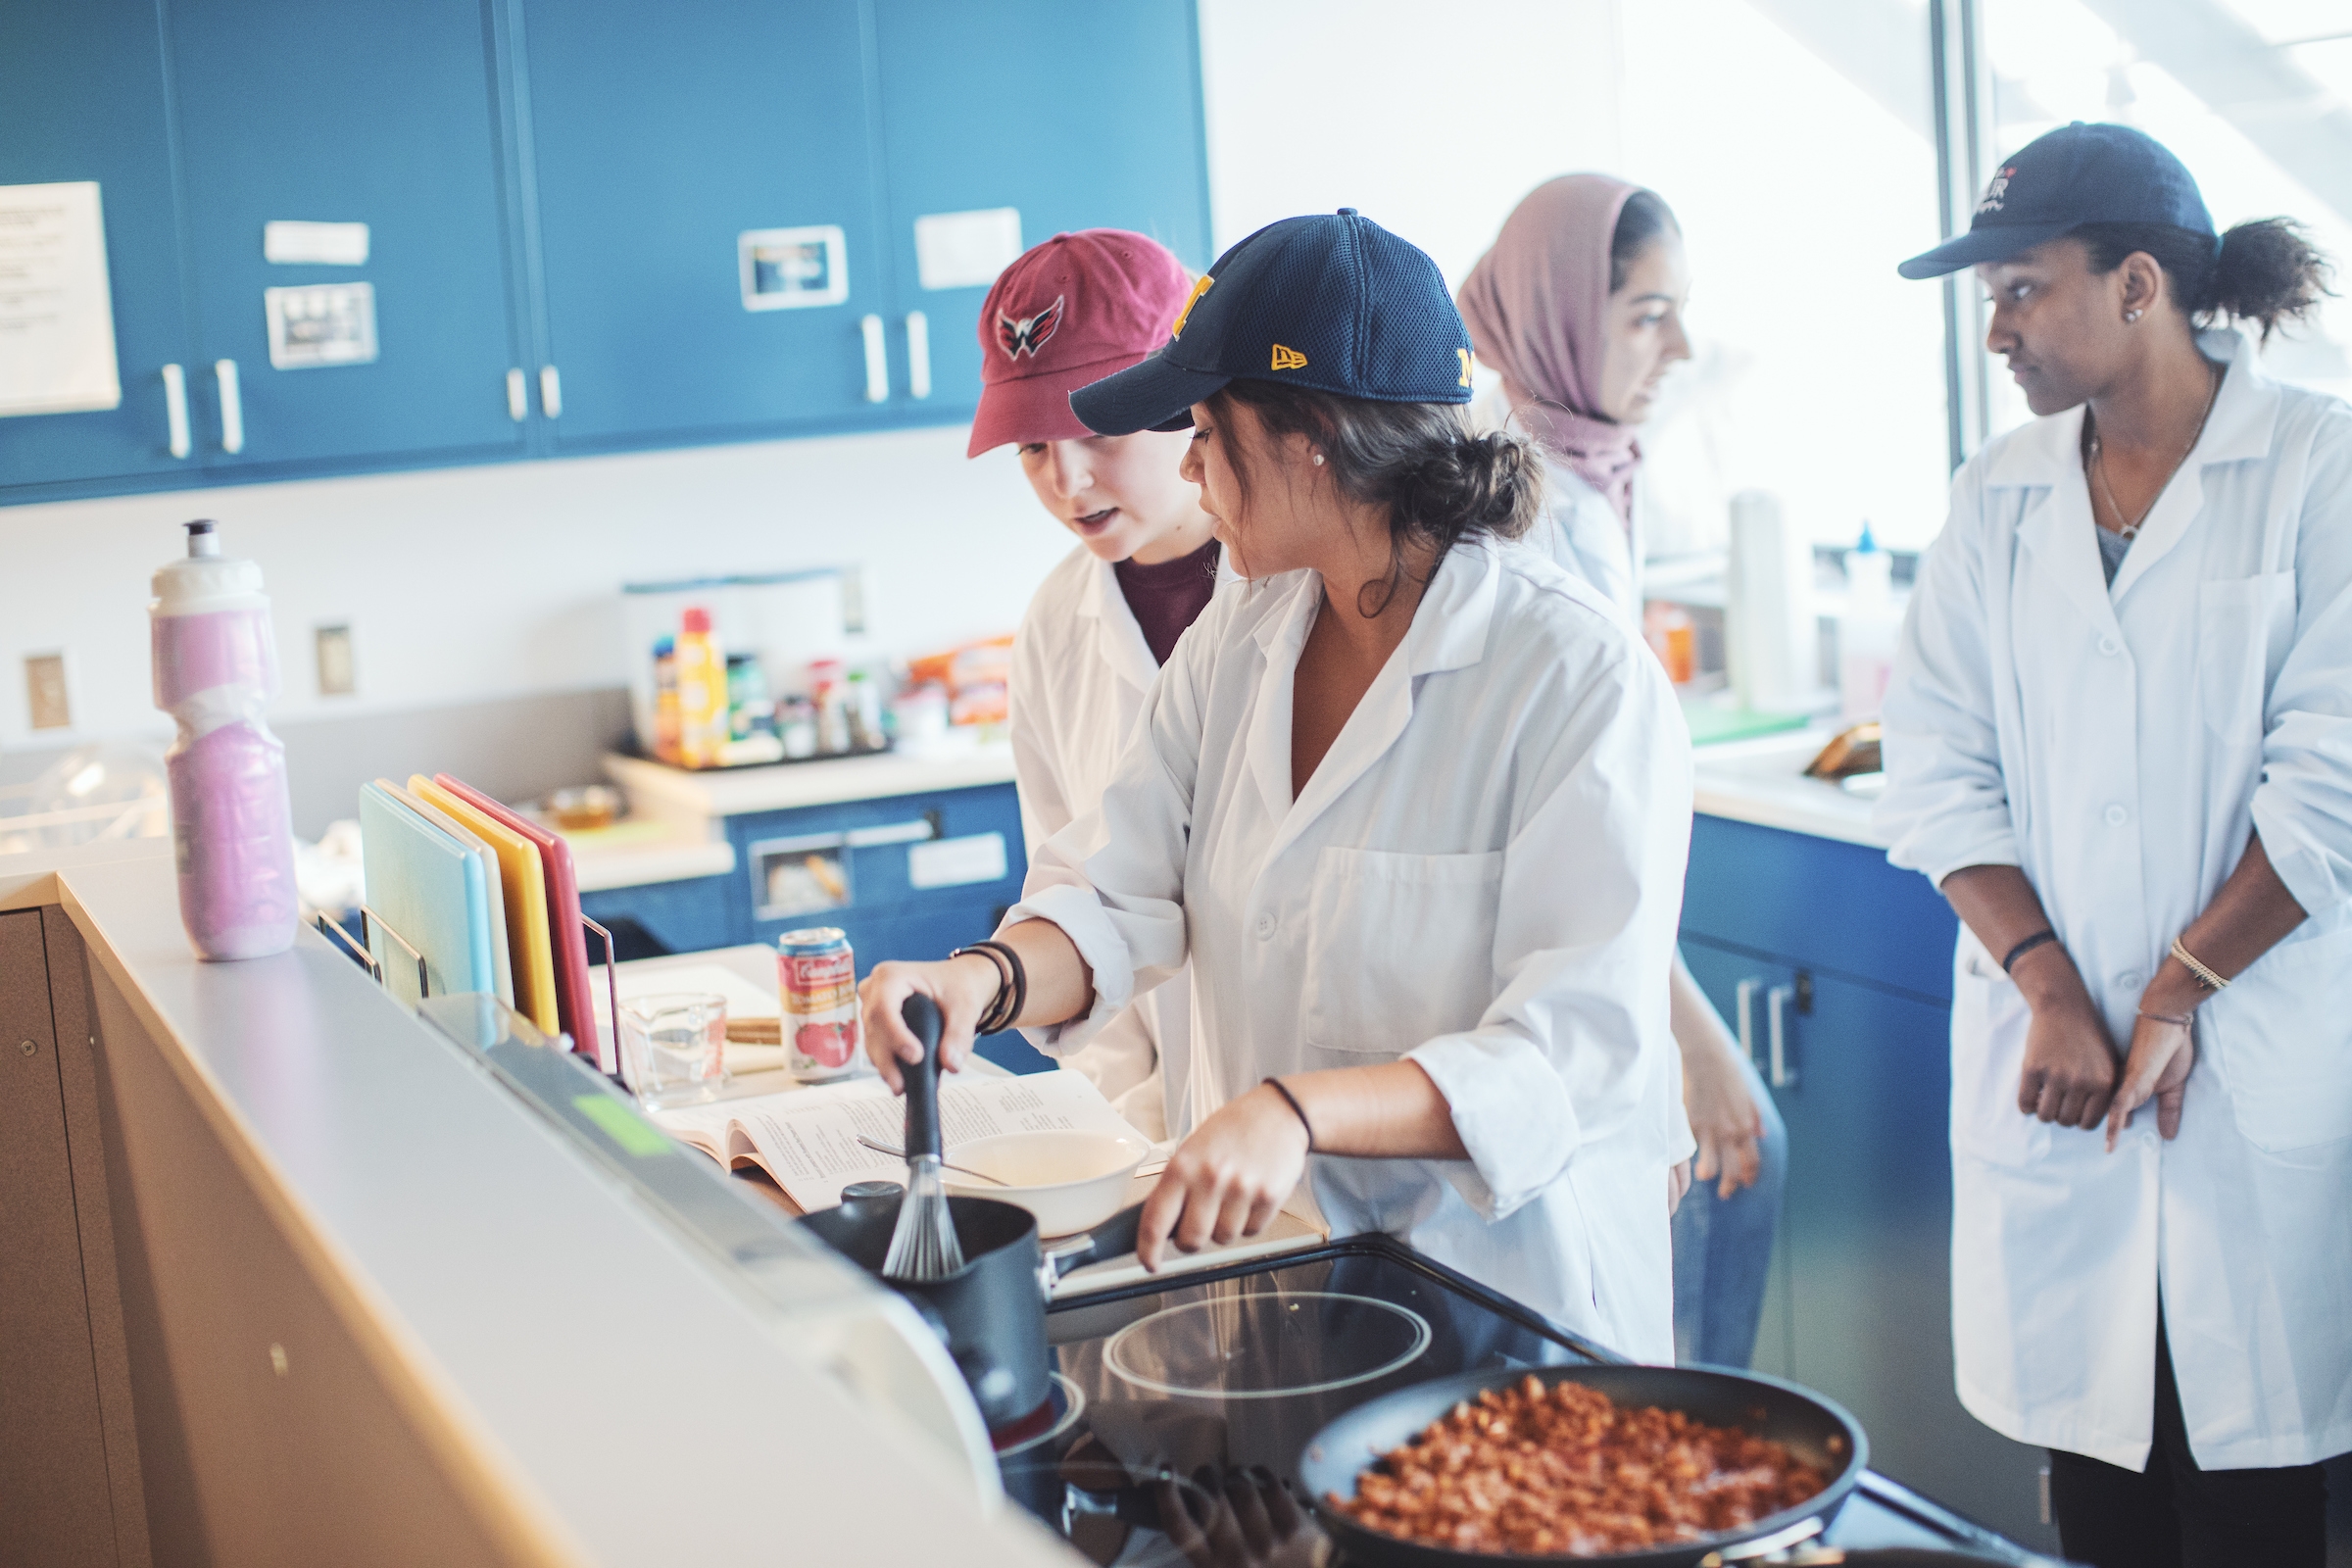 Students in kitchen